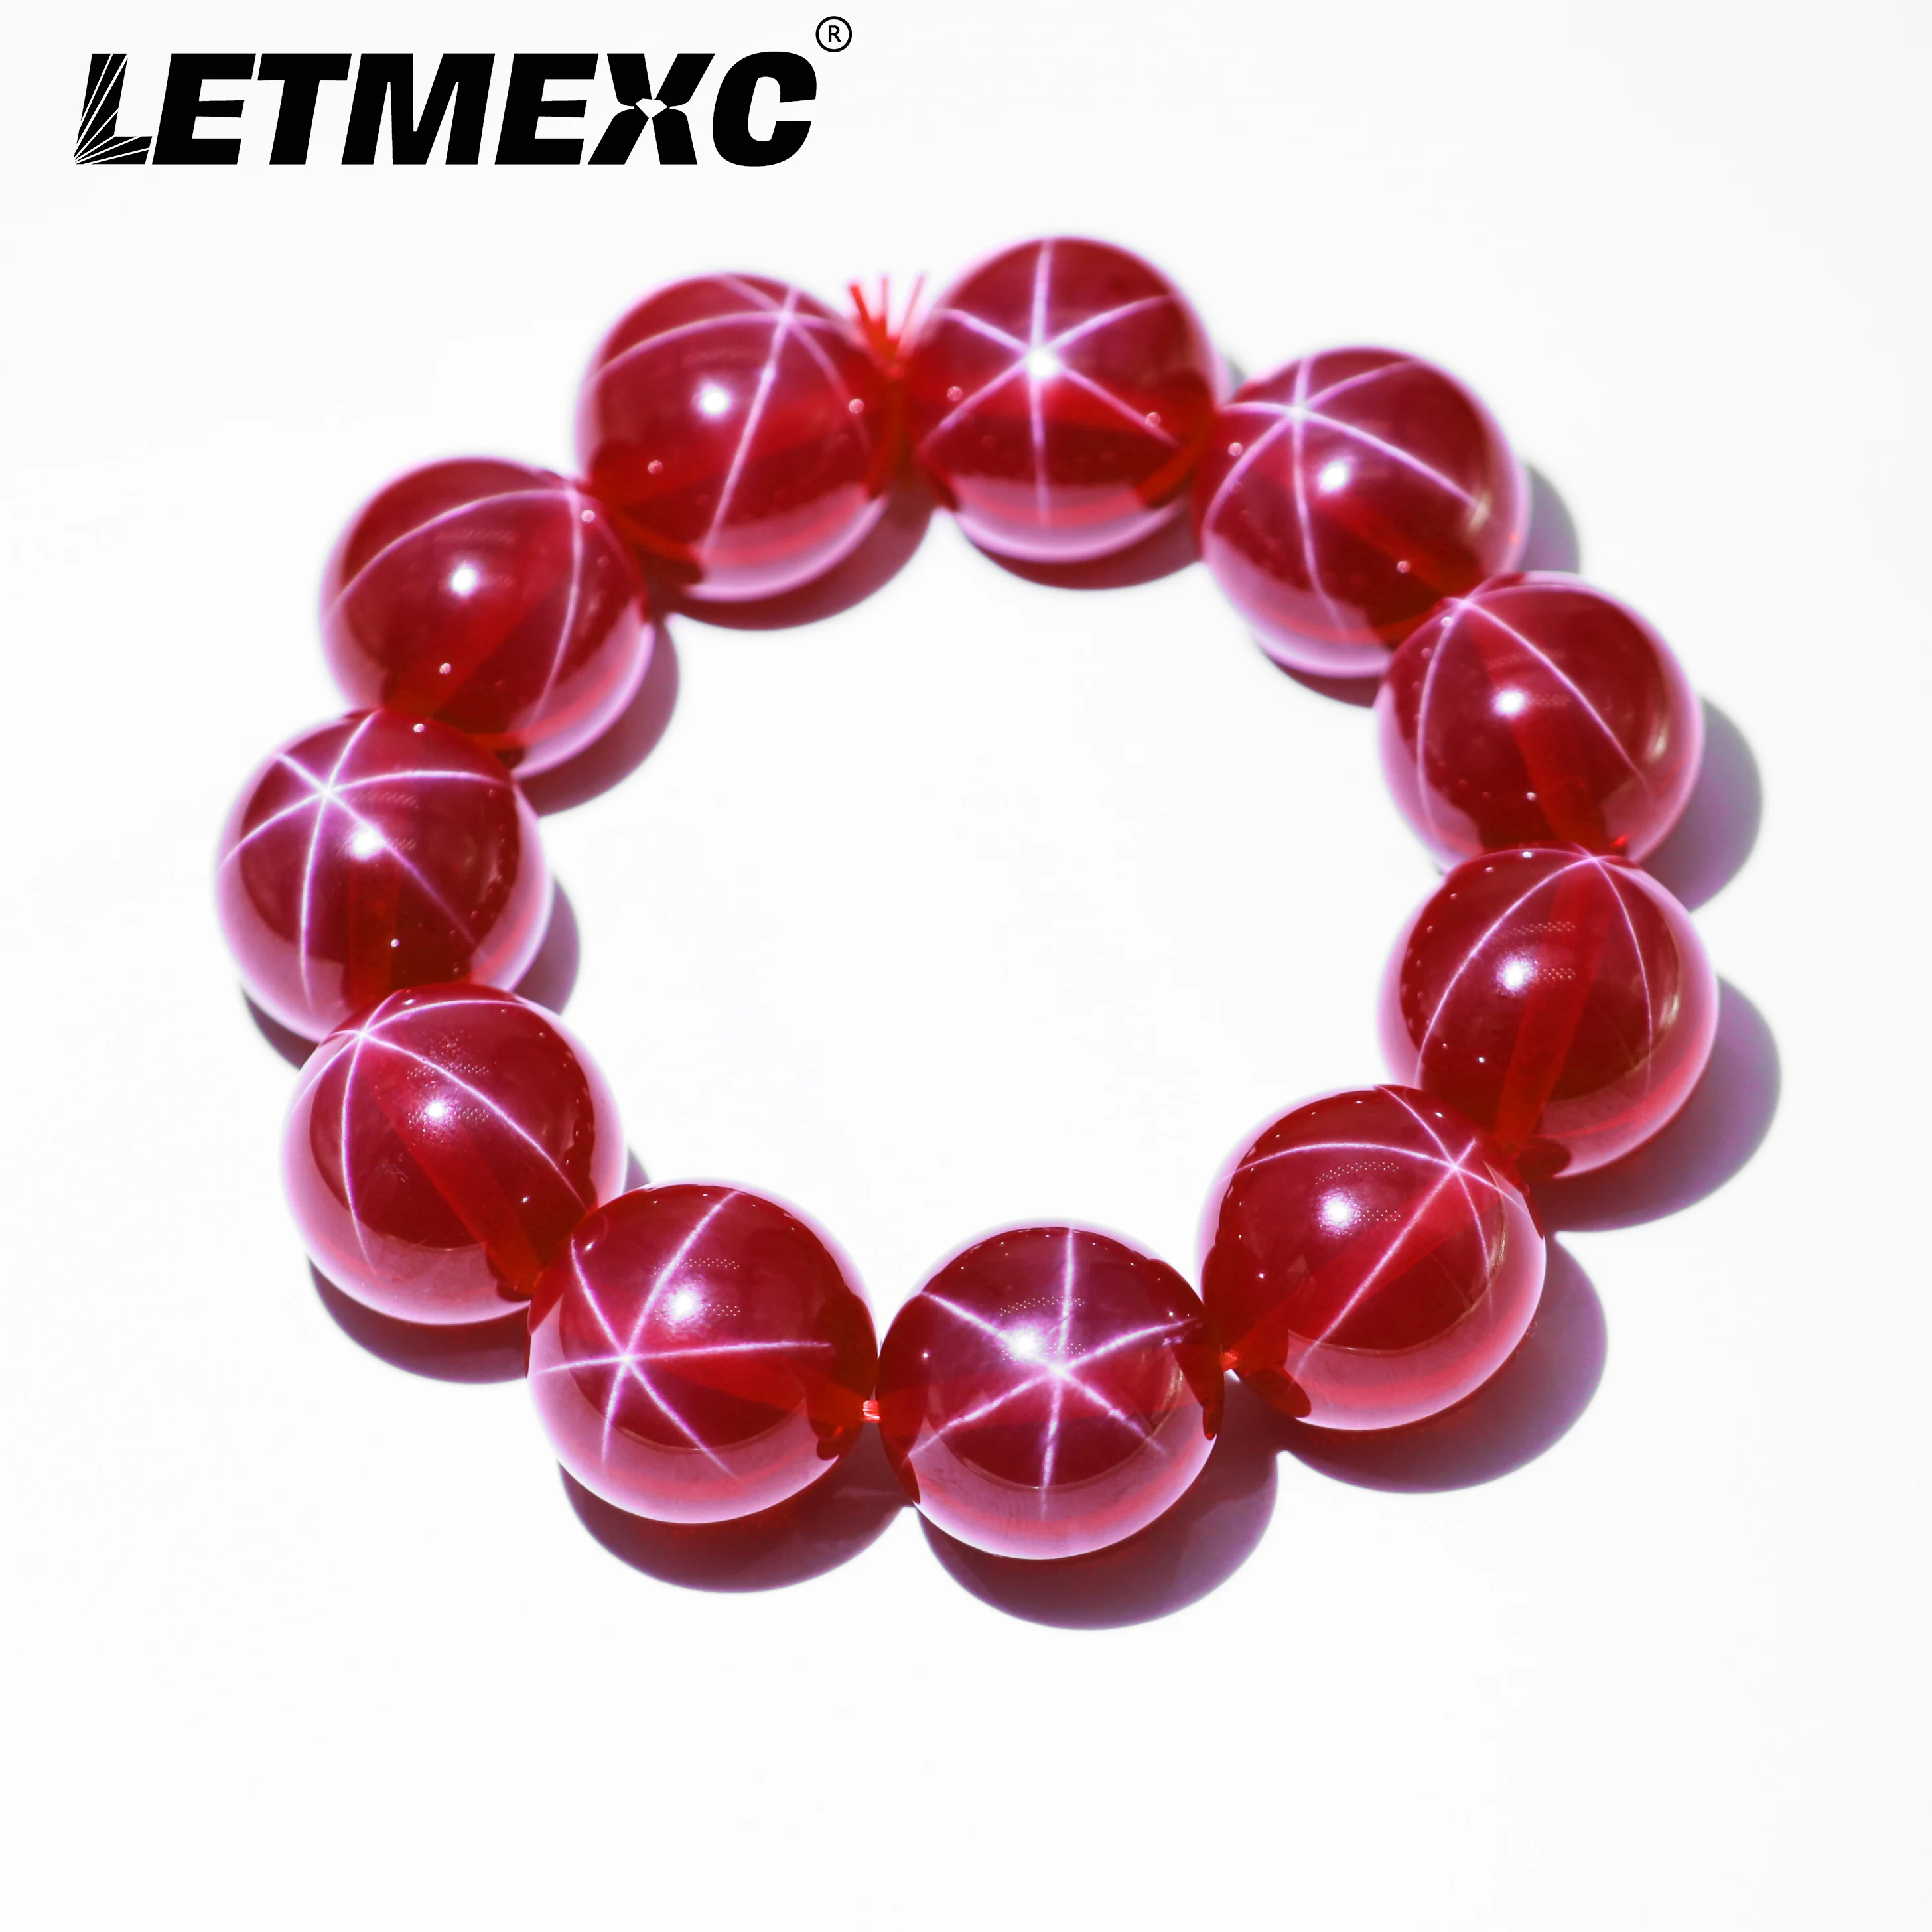 

LETMEXC Lab Created Synthetic Corundum Round Ball Beads 5# Red Ruby Stone Synthetic Star Ruby Gem Passed Diamond Test Pen